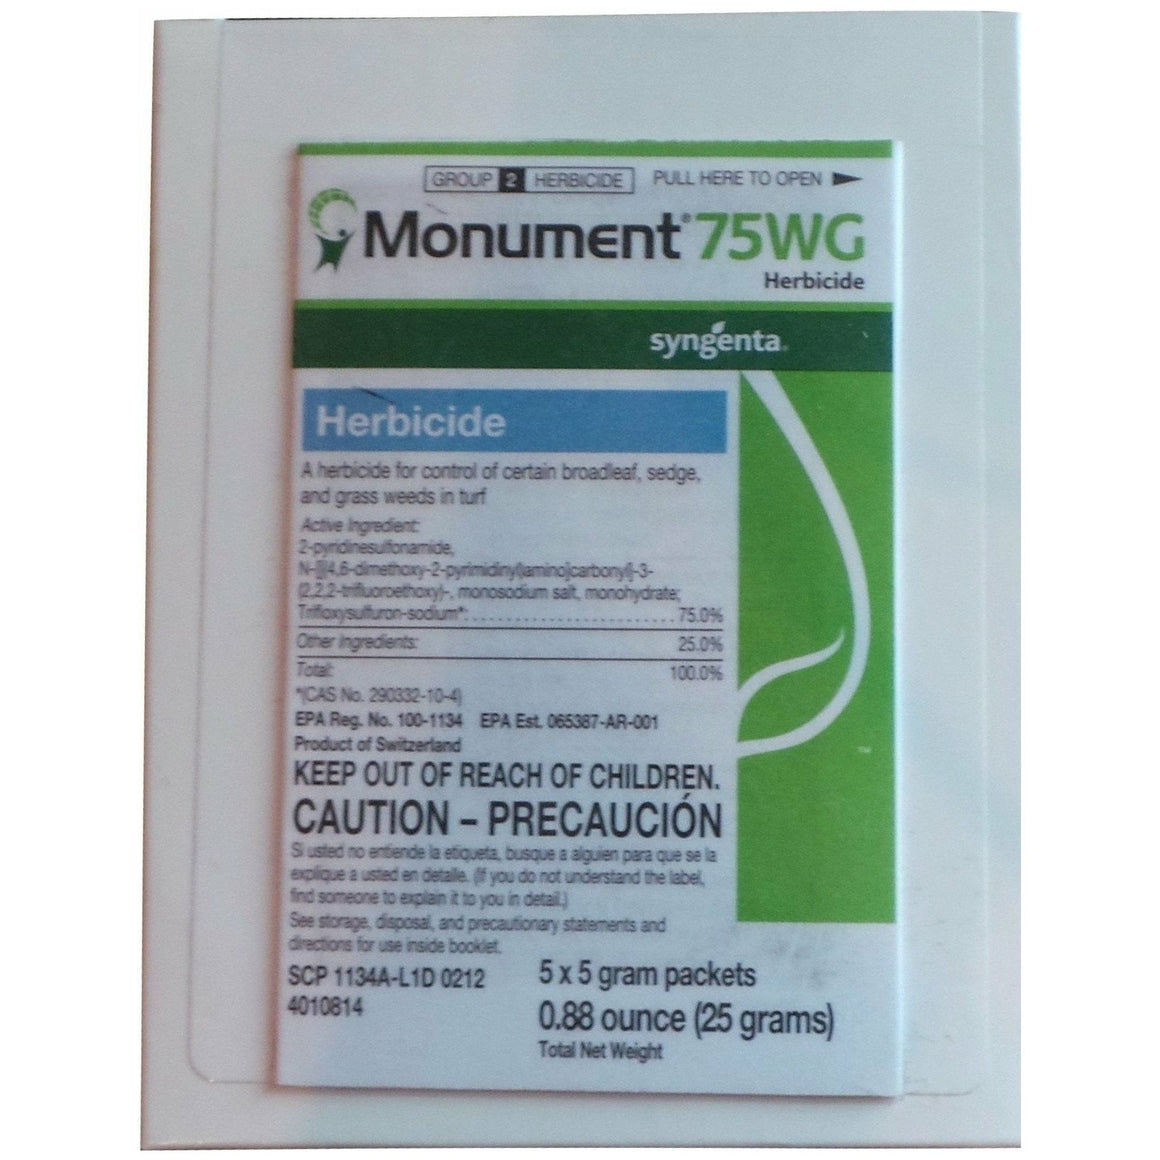 Monument 75WG Herbicide - 5 x 5 gram packets - Seed World